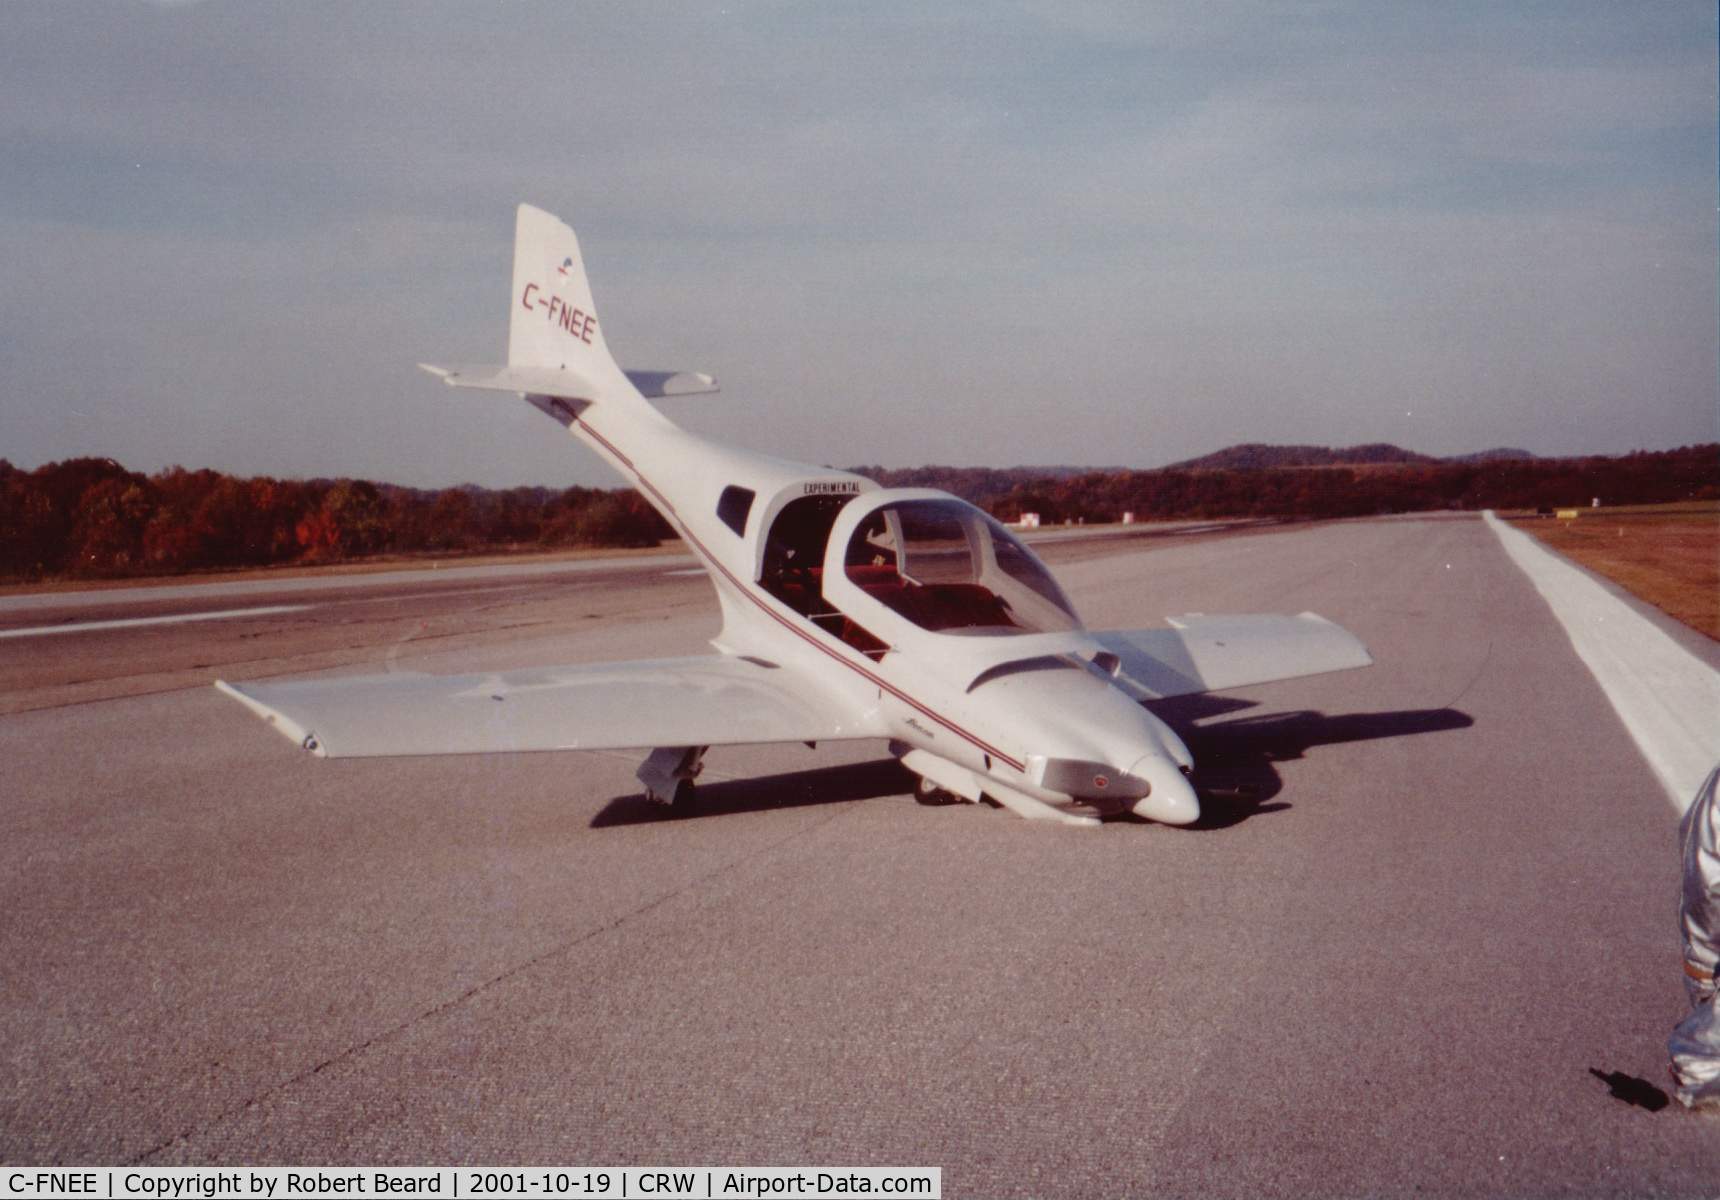 C-FNEE, 2005 Easy Fisherman EASY FISHERMAN 001 C/N 507, Nose wheel collapse at Yeagar Airport (Charleston, WV, CRW) on October 19, 2001 while on a ferring flight to Diamond Head, Mississippi (66Y) from Toronto, Ontario, Canada.